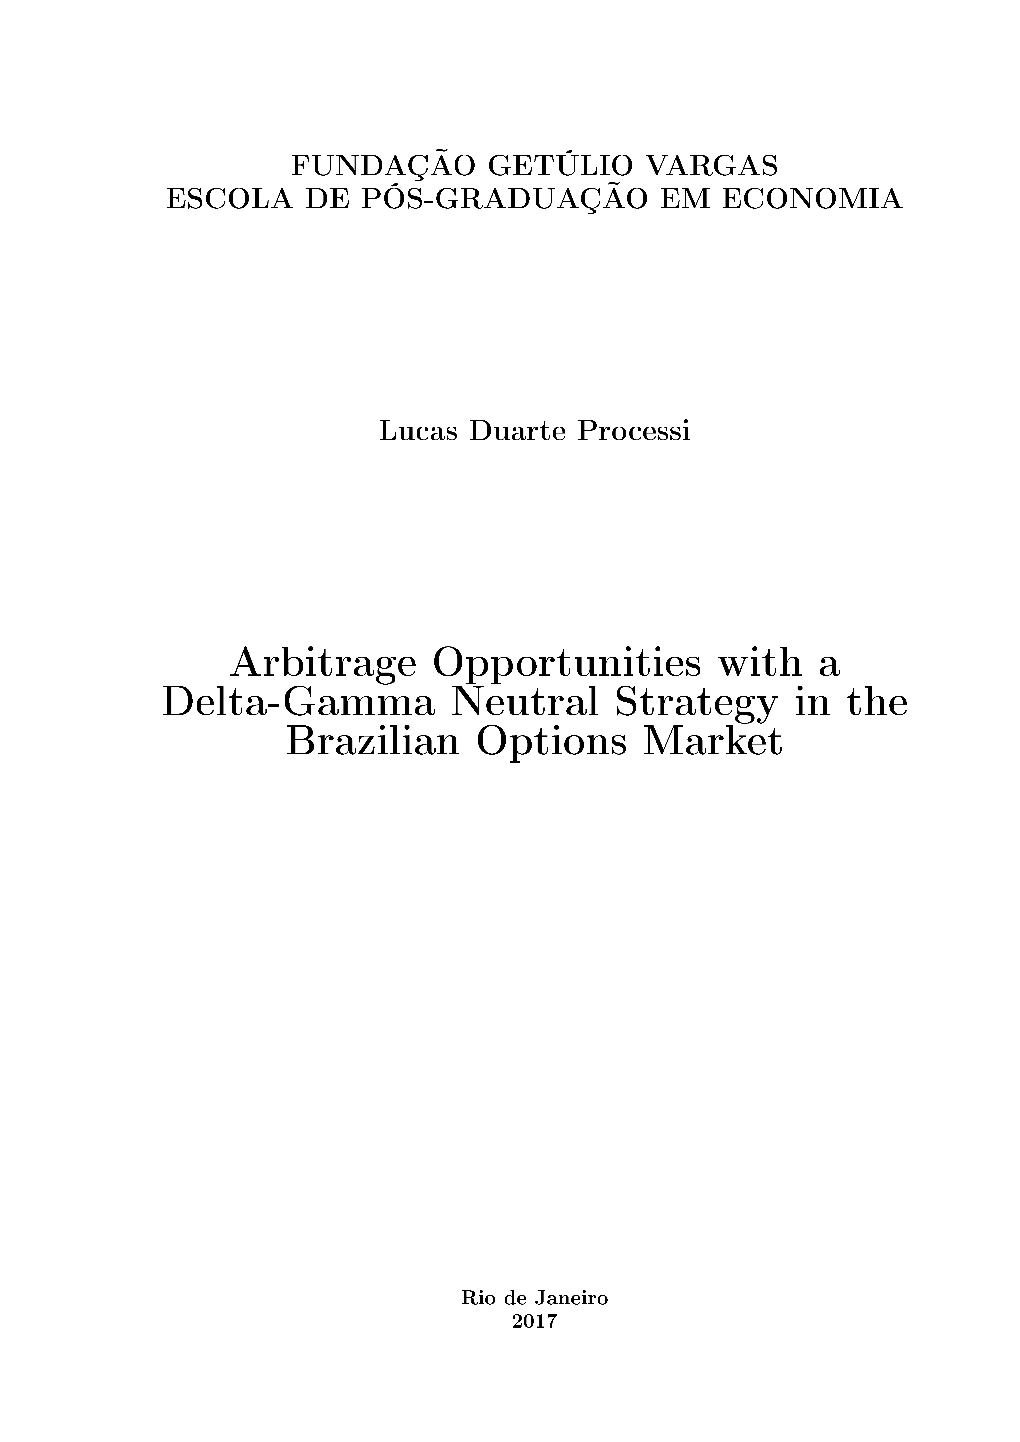 Arbitrage Opportunities with a Delta-Gamma Neutral Strategy in the Brazilian Options Market